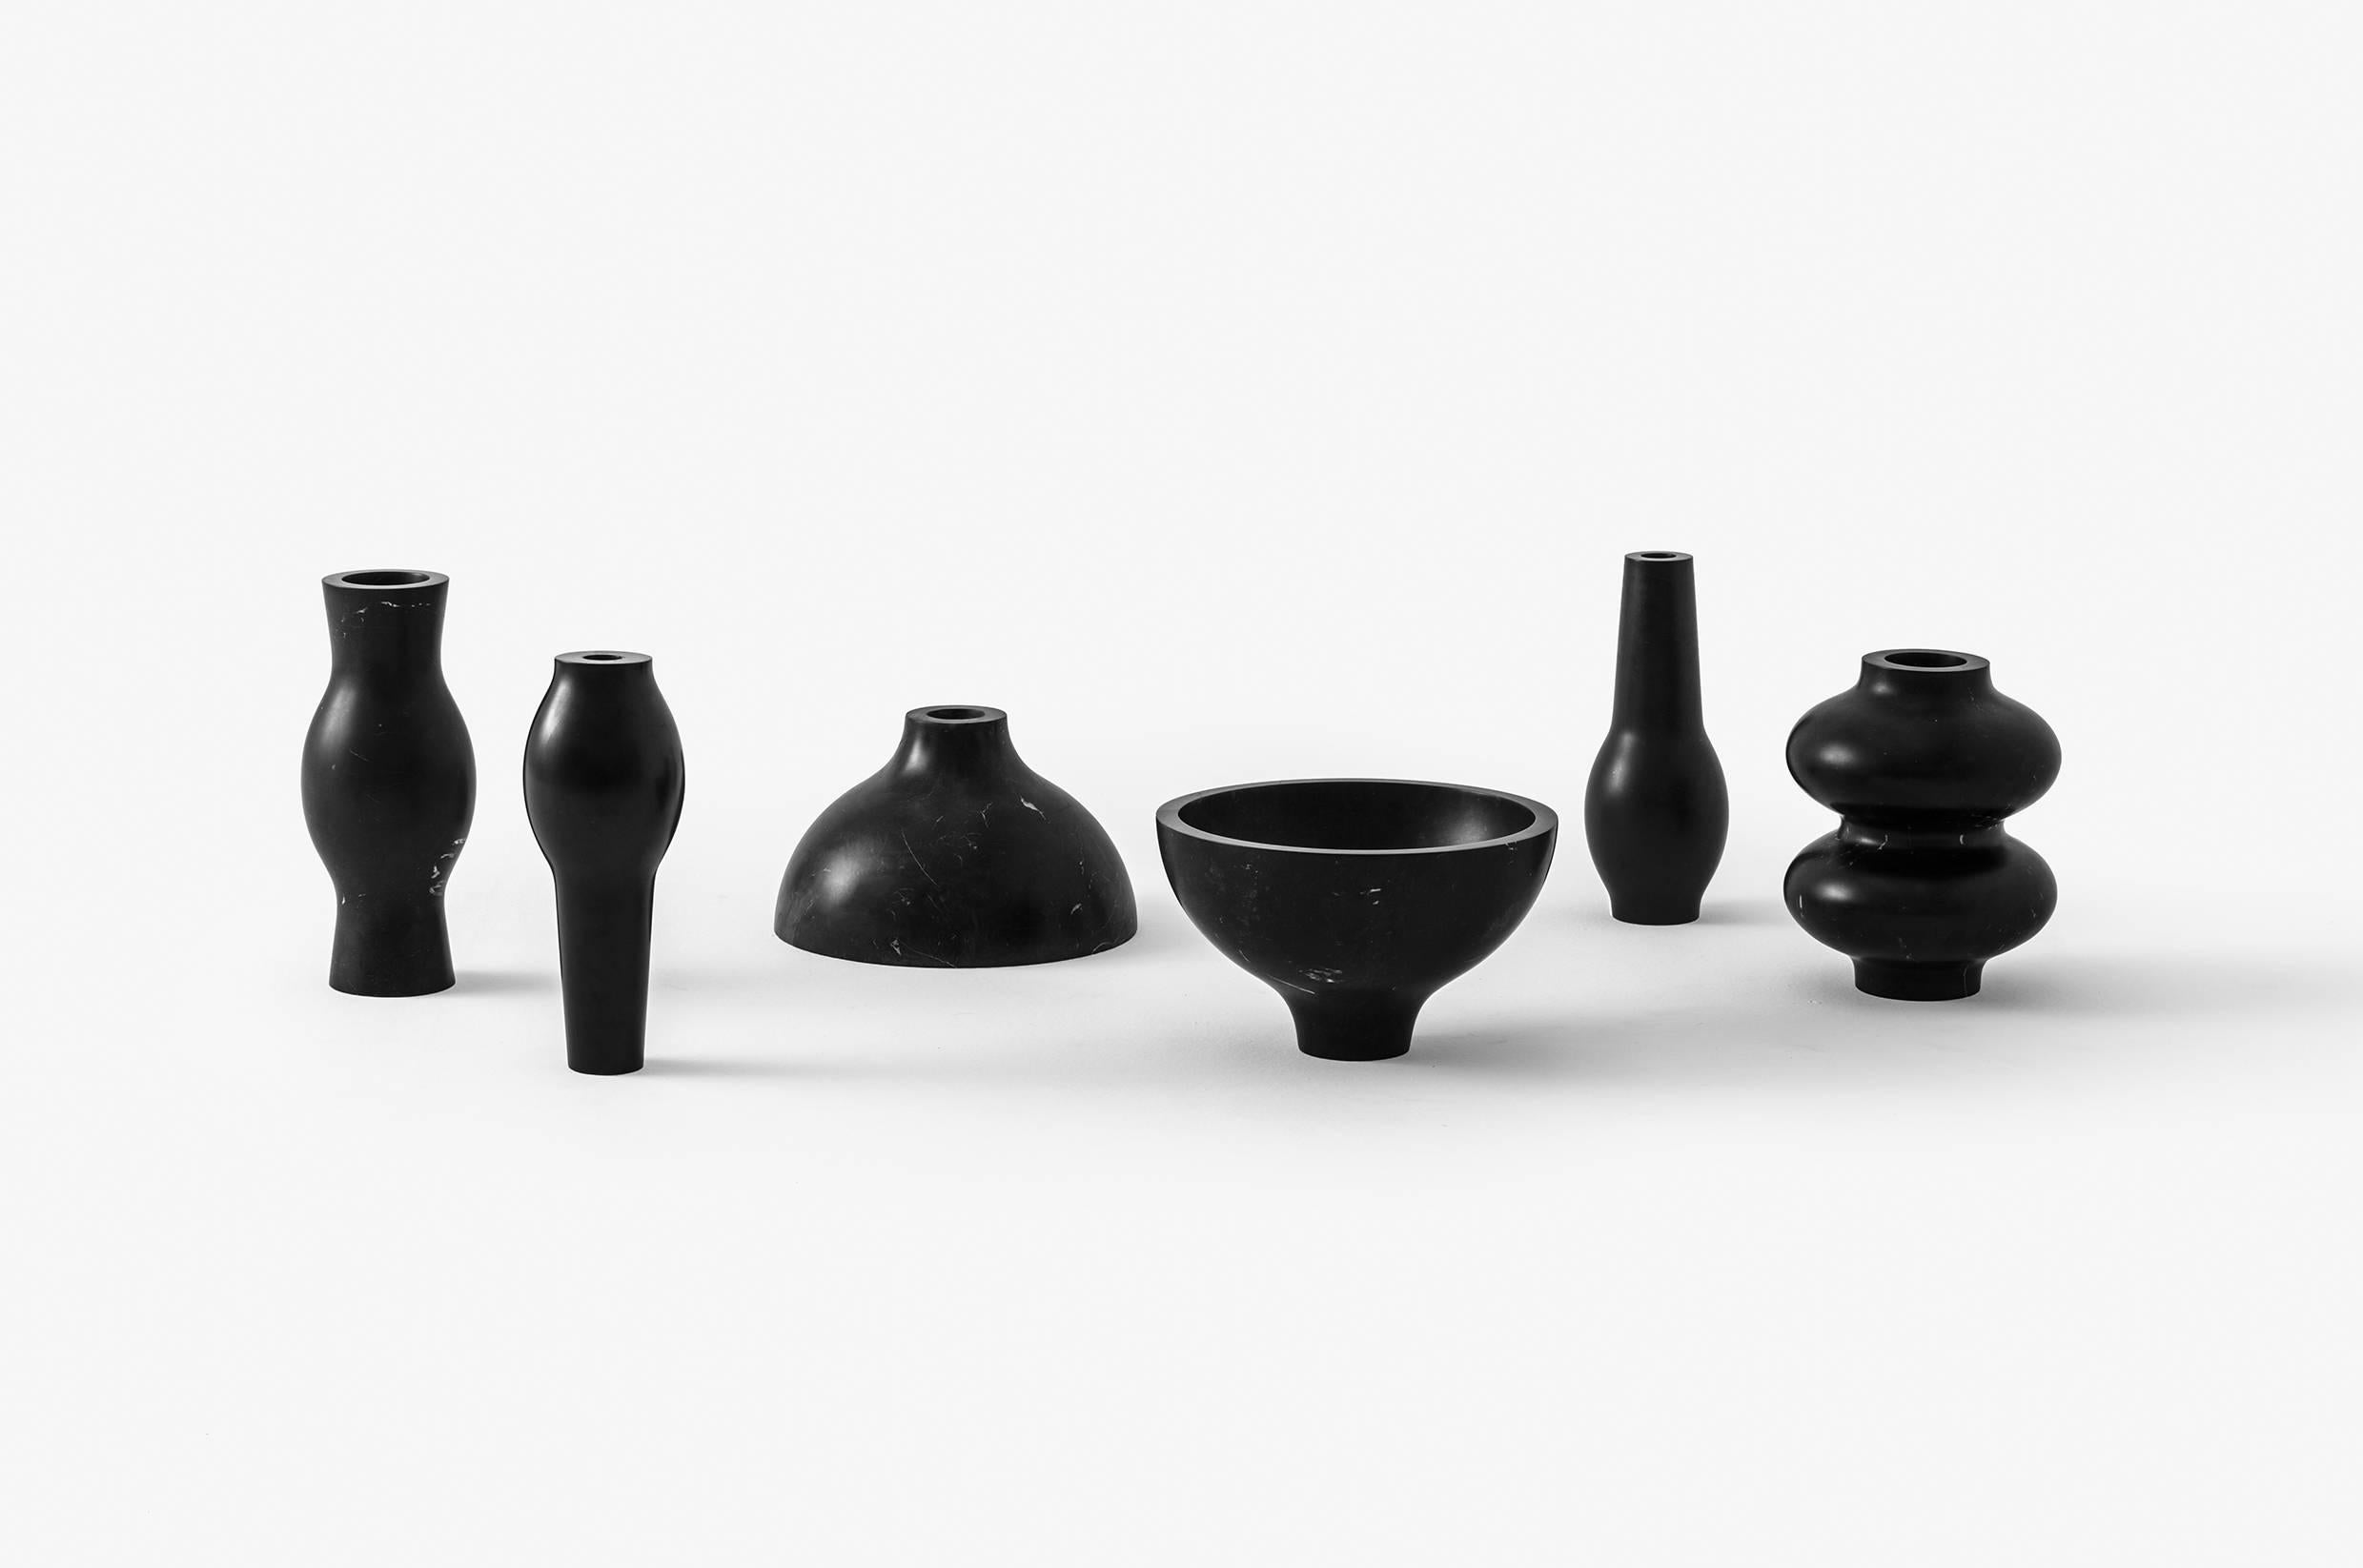 Sacred Ritual Objects is the first collection by EWE Studio. Created out of fascination by the evolving skills of the artisans and their successful execution of exquisite objects, designed to ignite a connection with the divine.
The collection